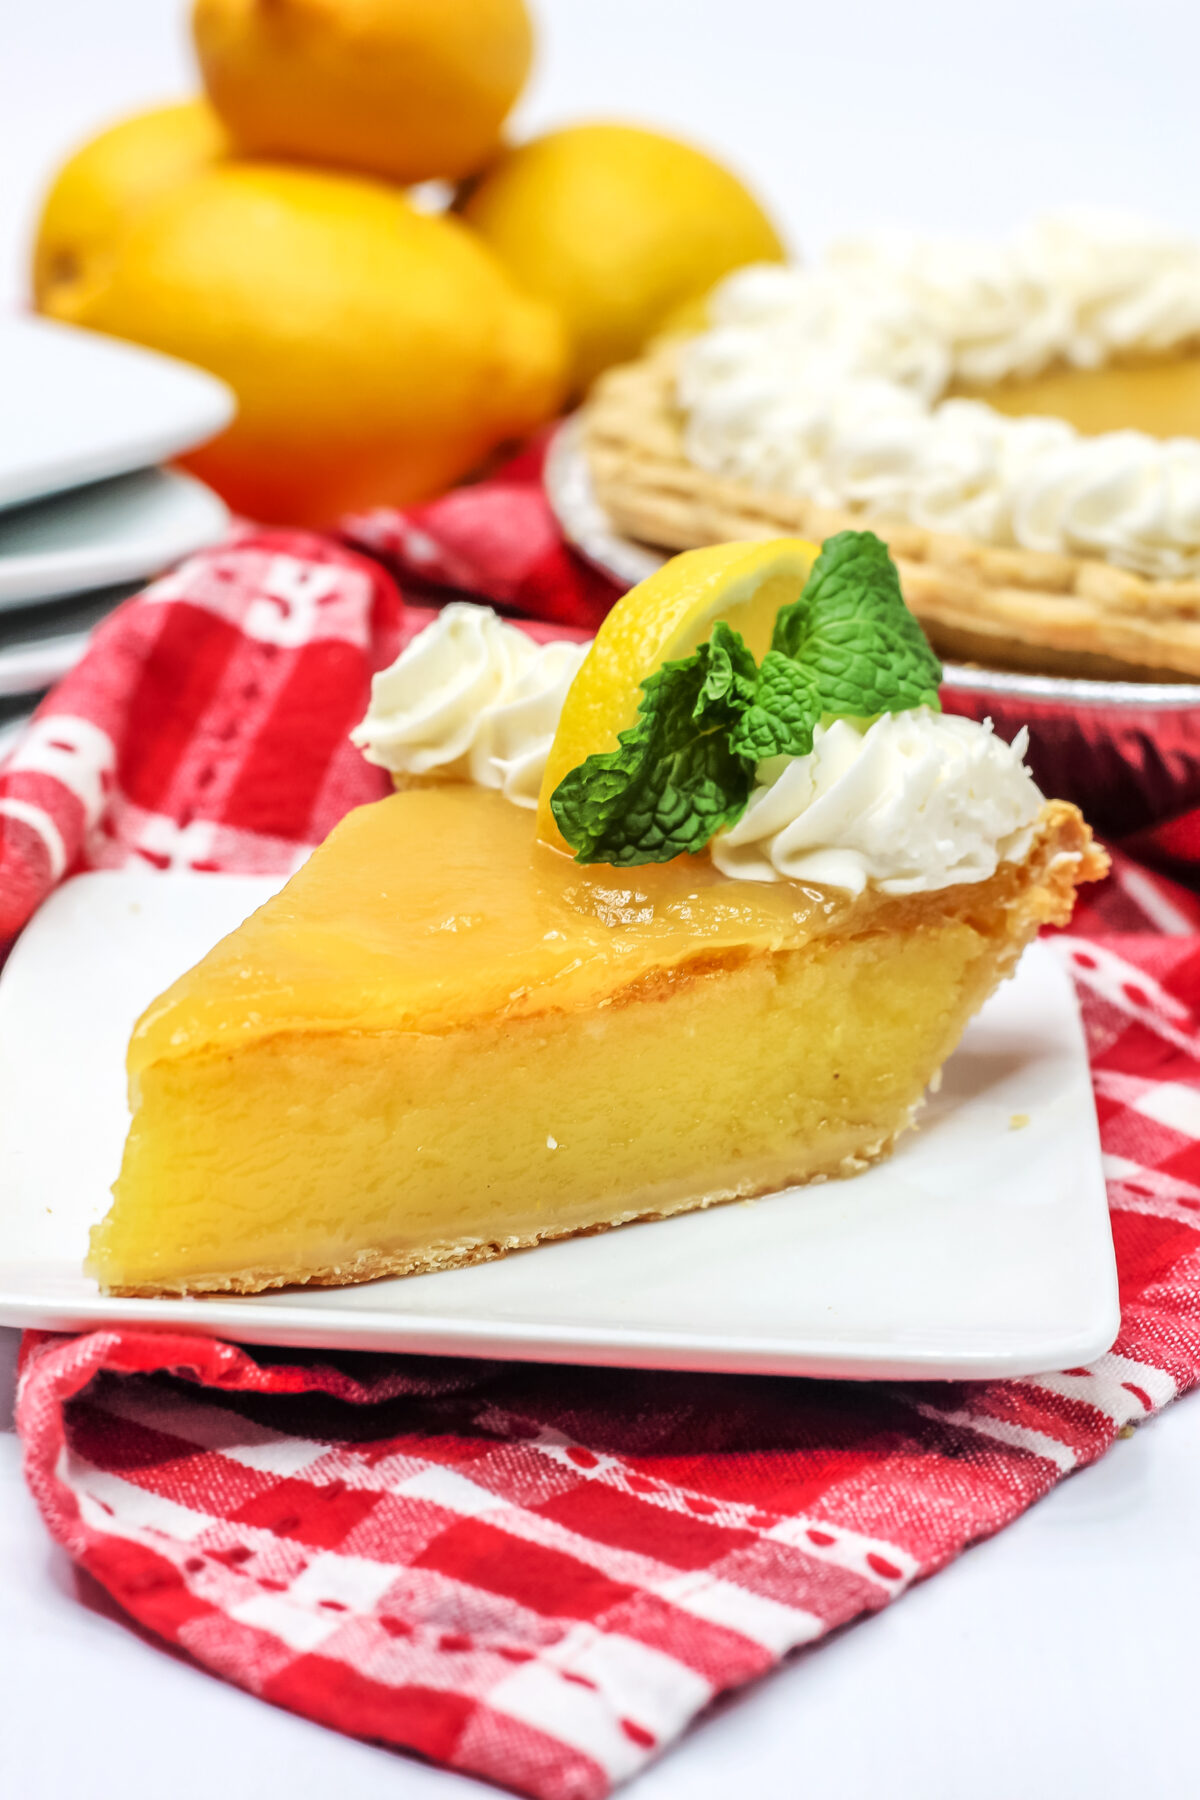 Smooth, custardy, tangy and sweet, this Lemon Chess Pie is made with the classic recipe then topped with lemon curd for the best Chess Pie!